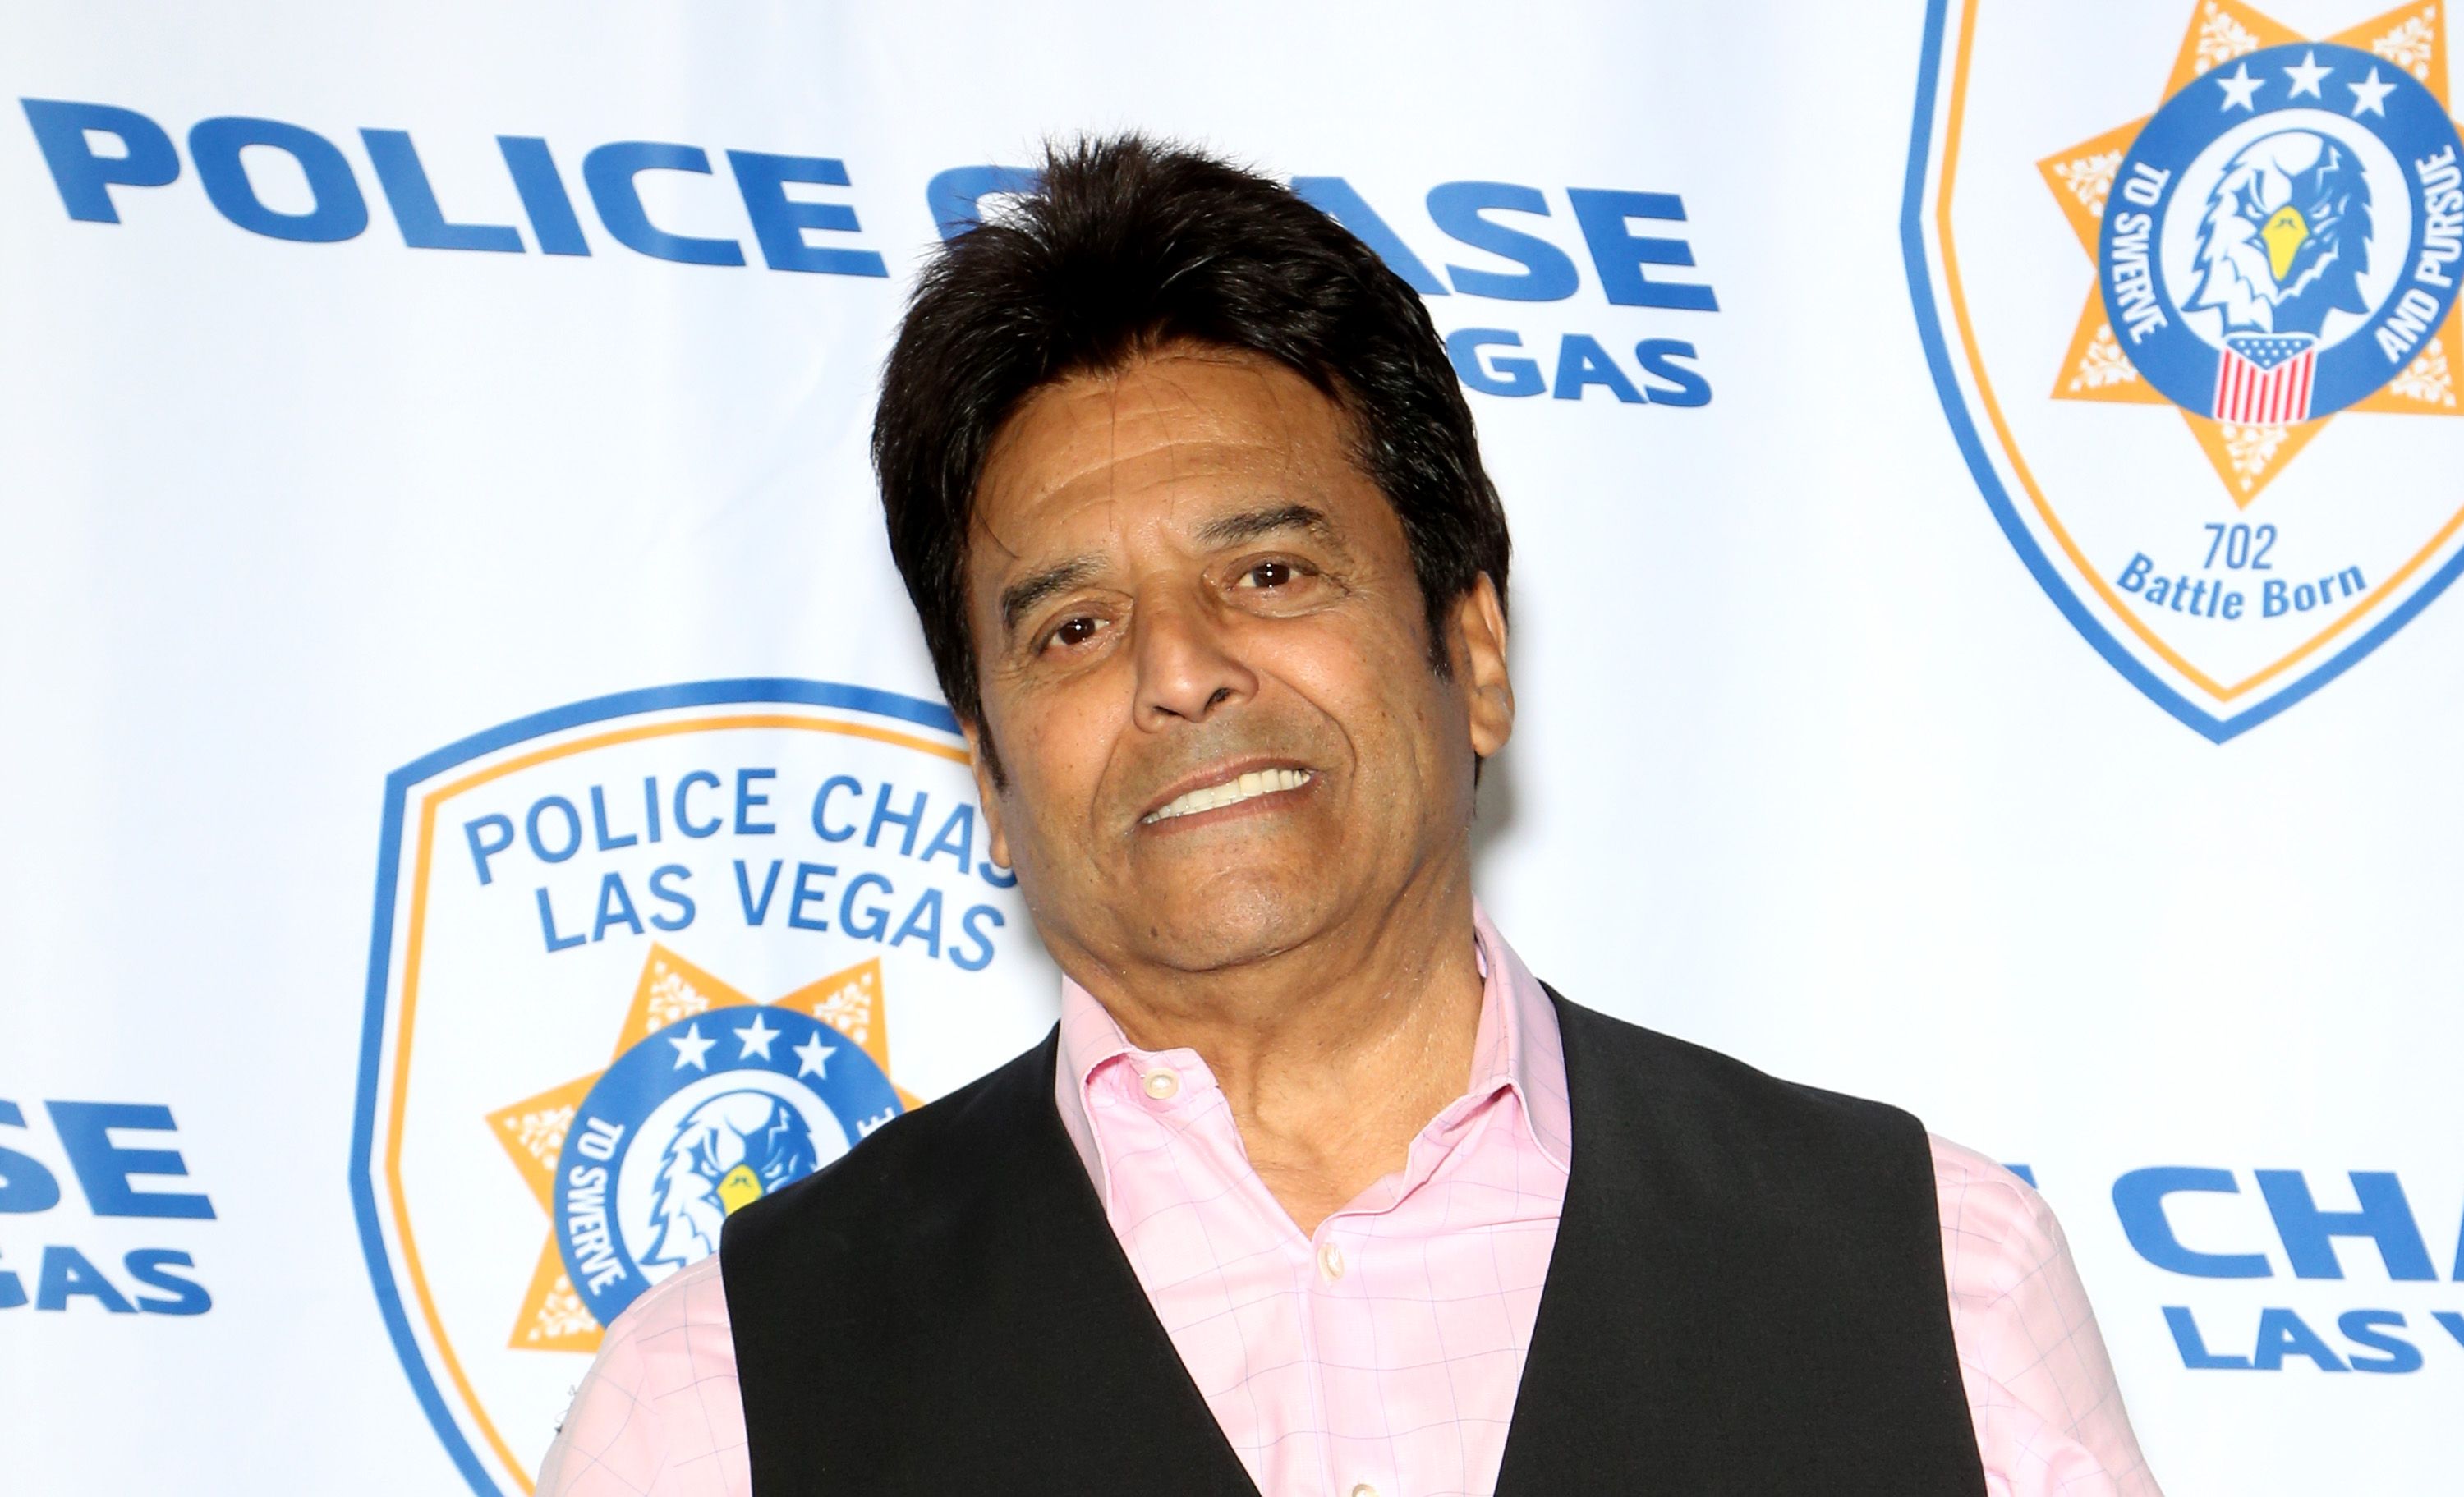 Actor Erik Estrada at the grand opening of Police Chase Las Vegas on January 19, 2019 | Photo: Getty Images